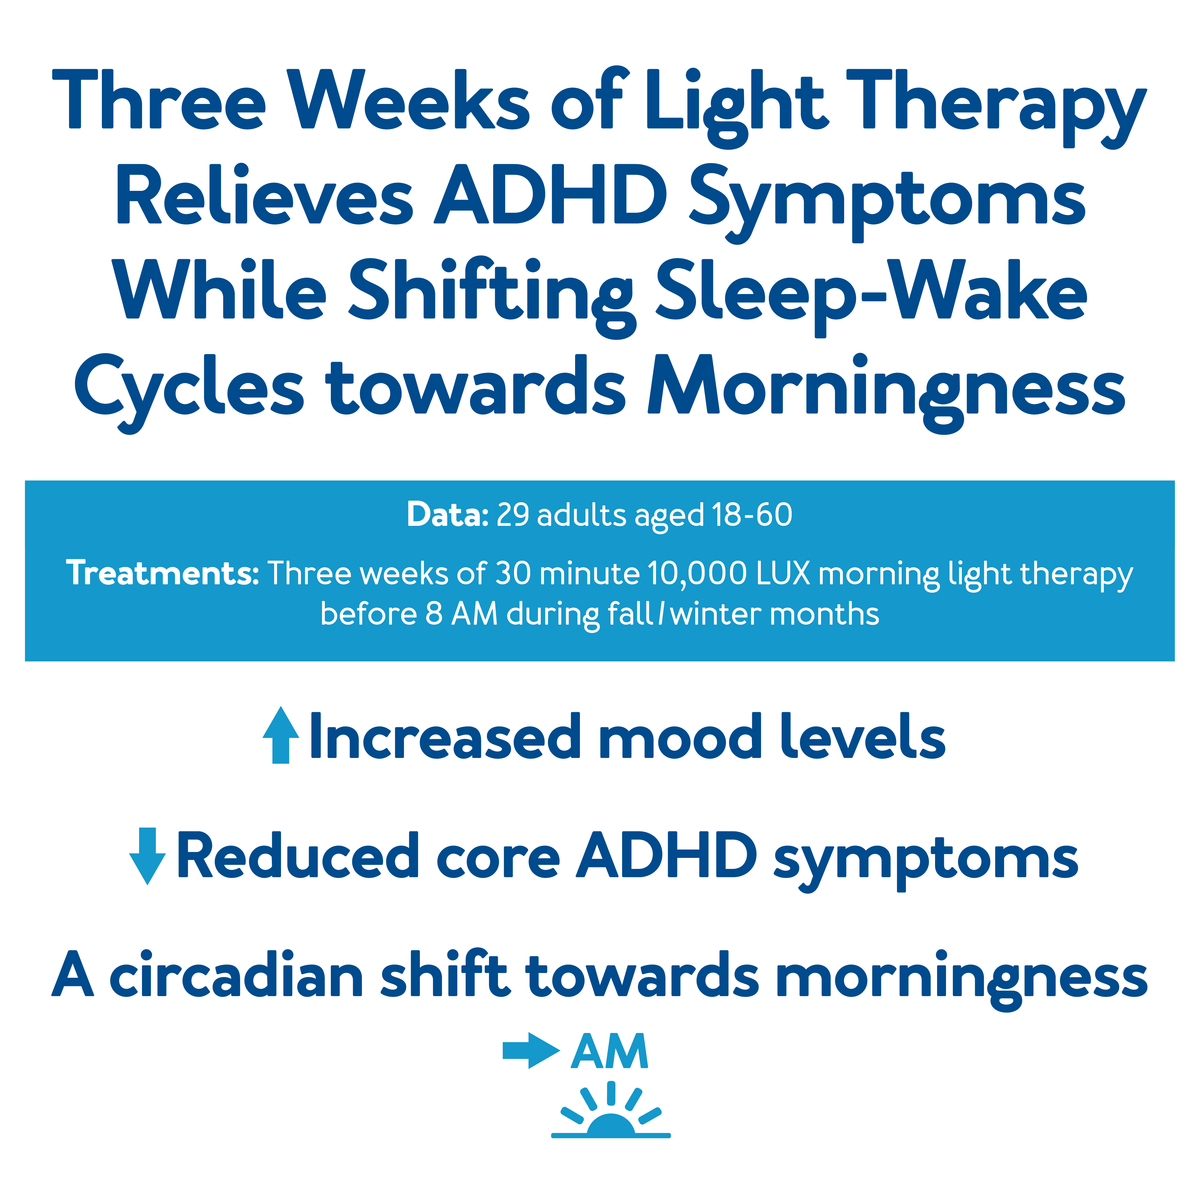 Three Weeks of Light Therapy Relieves, further details are provided below.